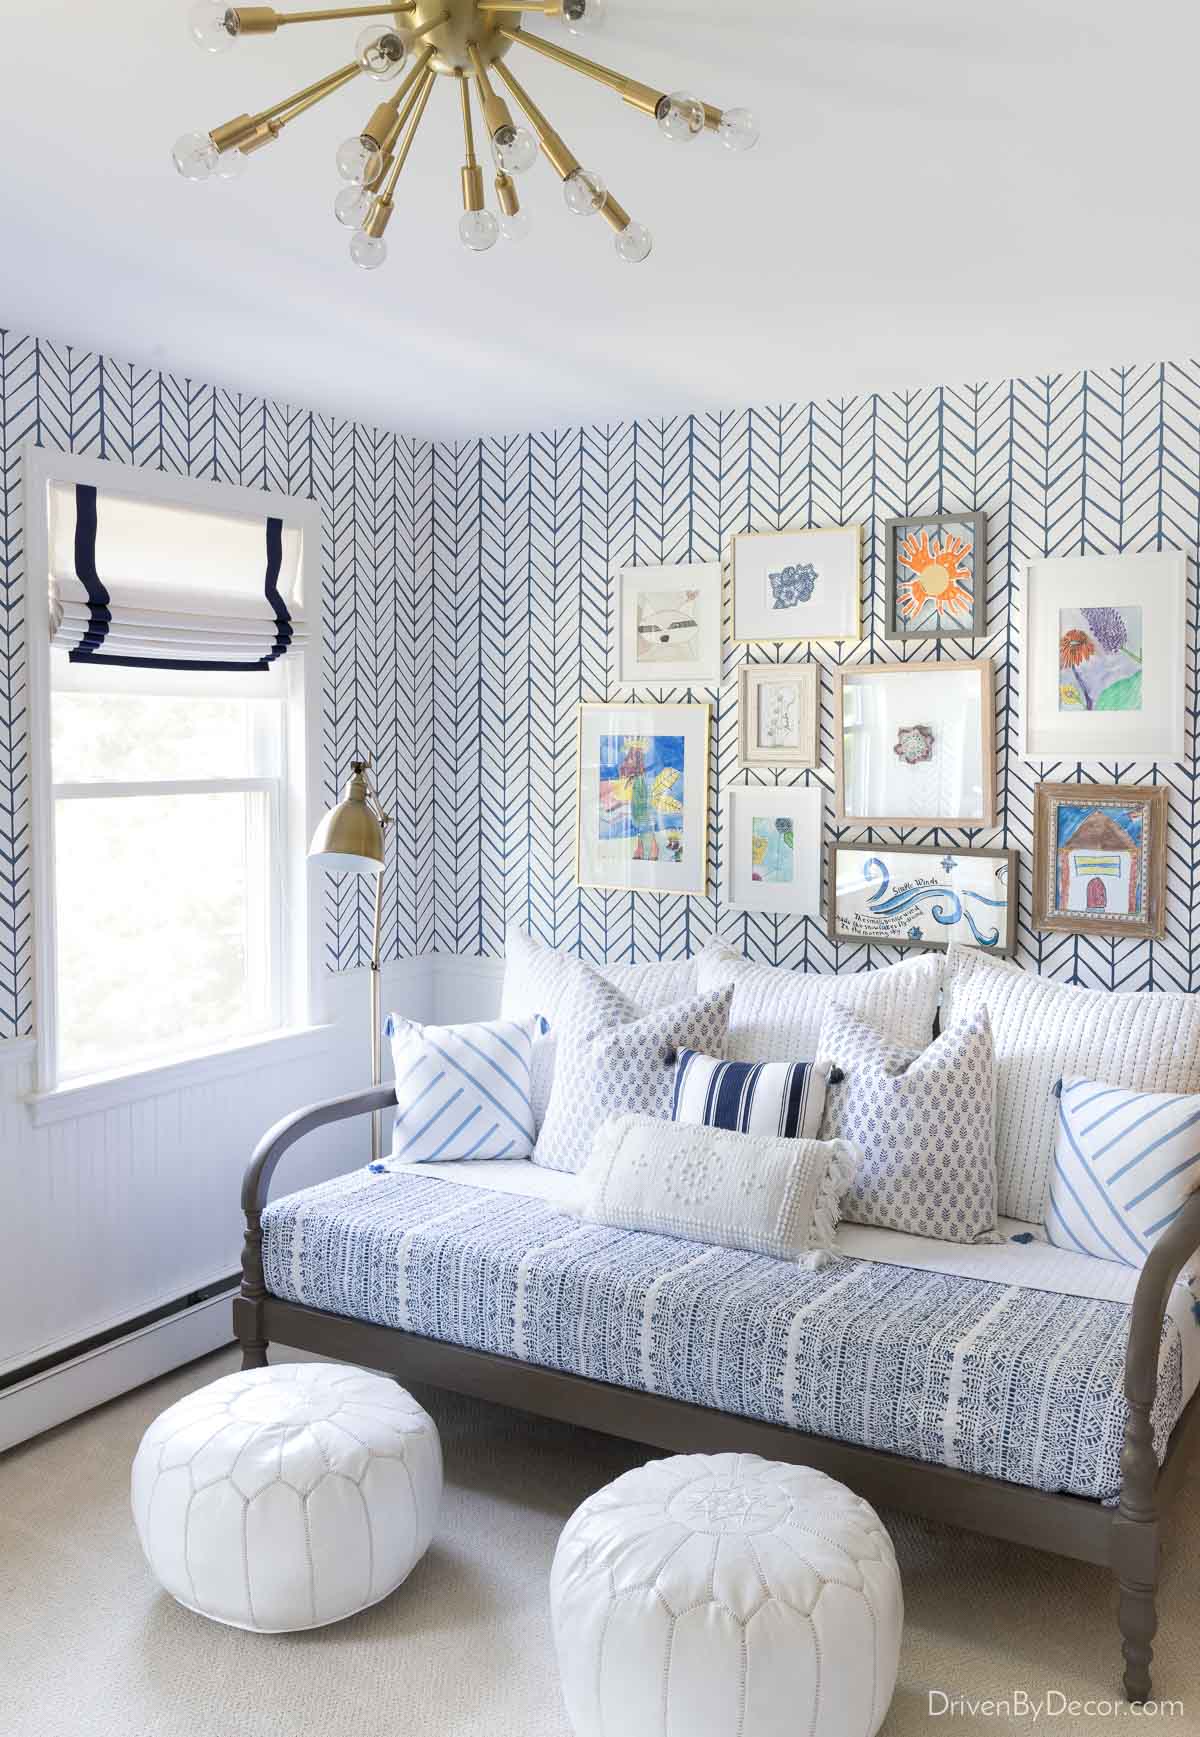 Blue and white wallpaper installation above beadboard